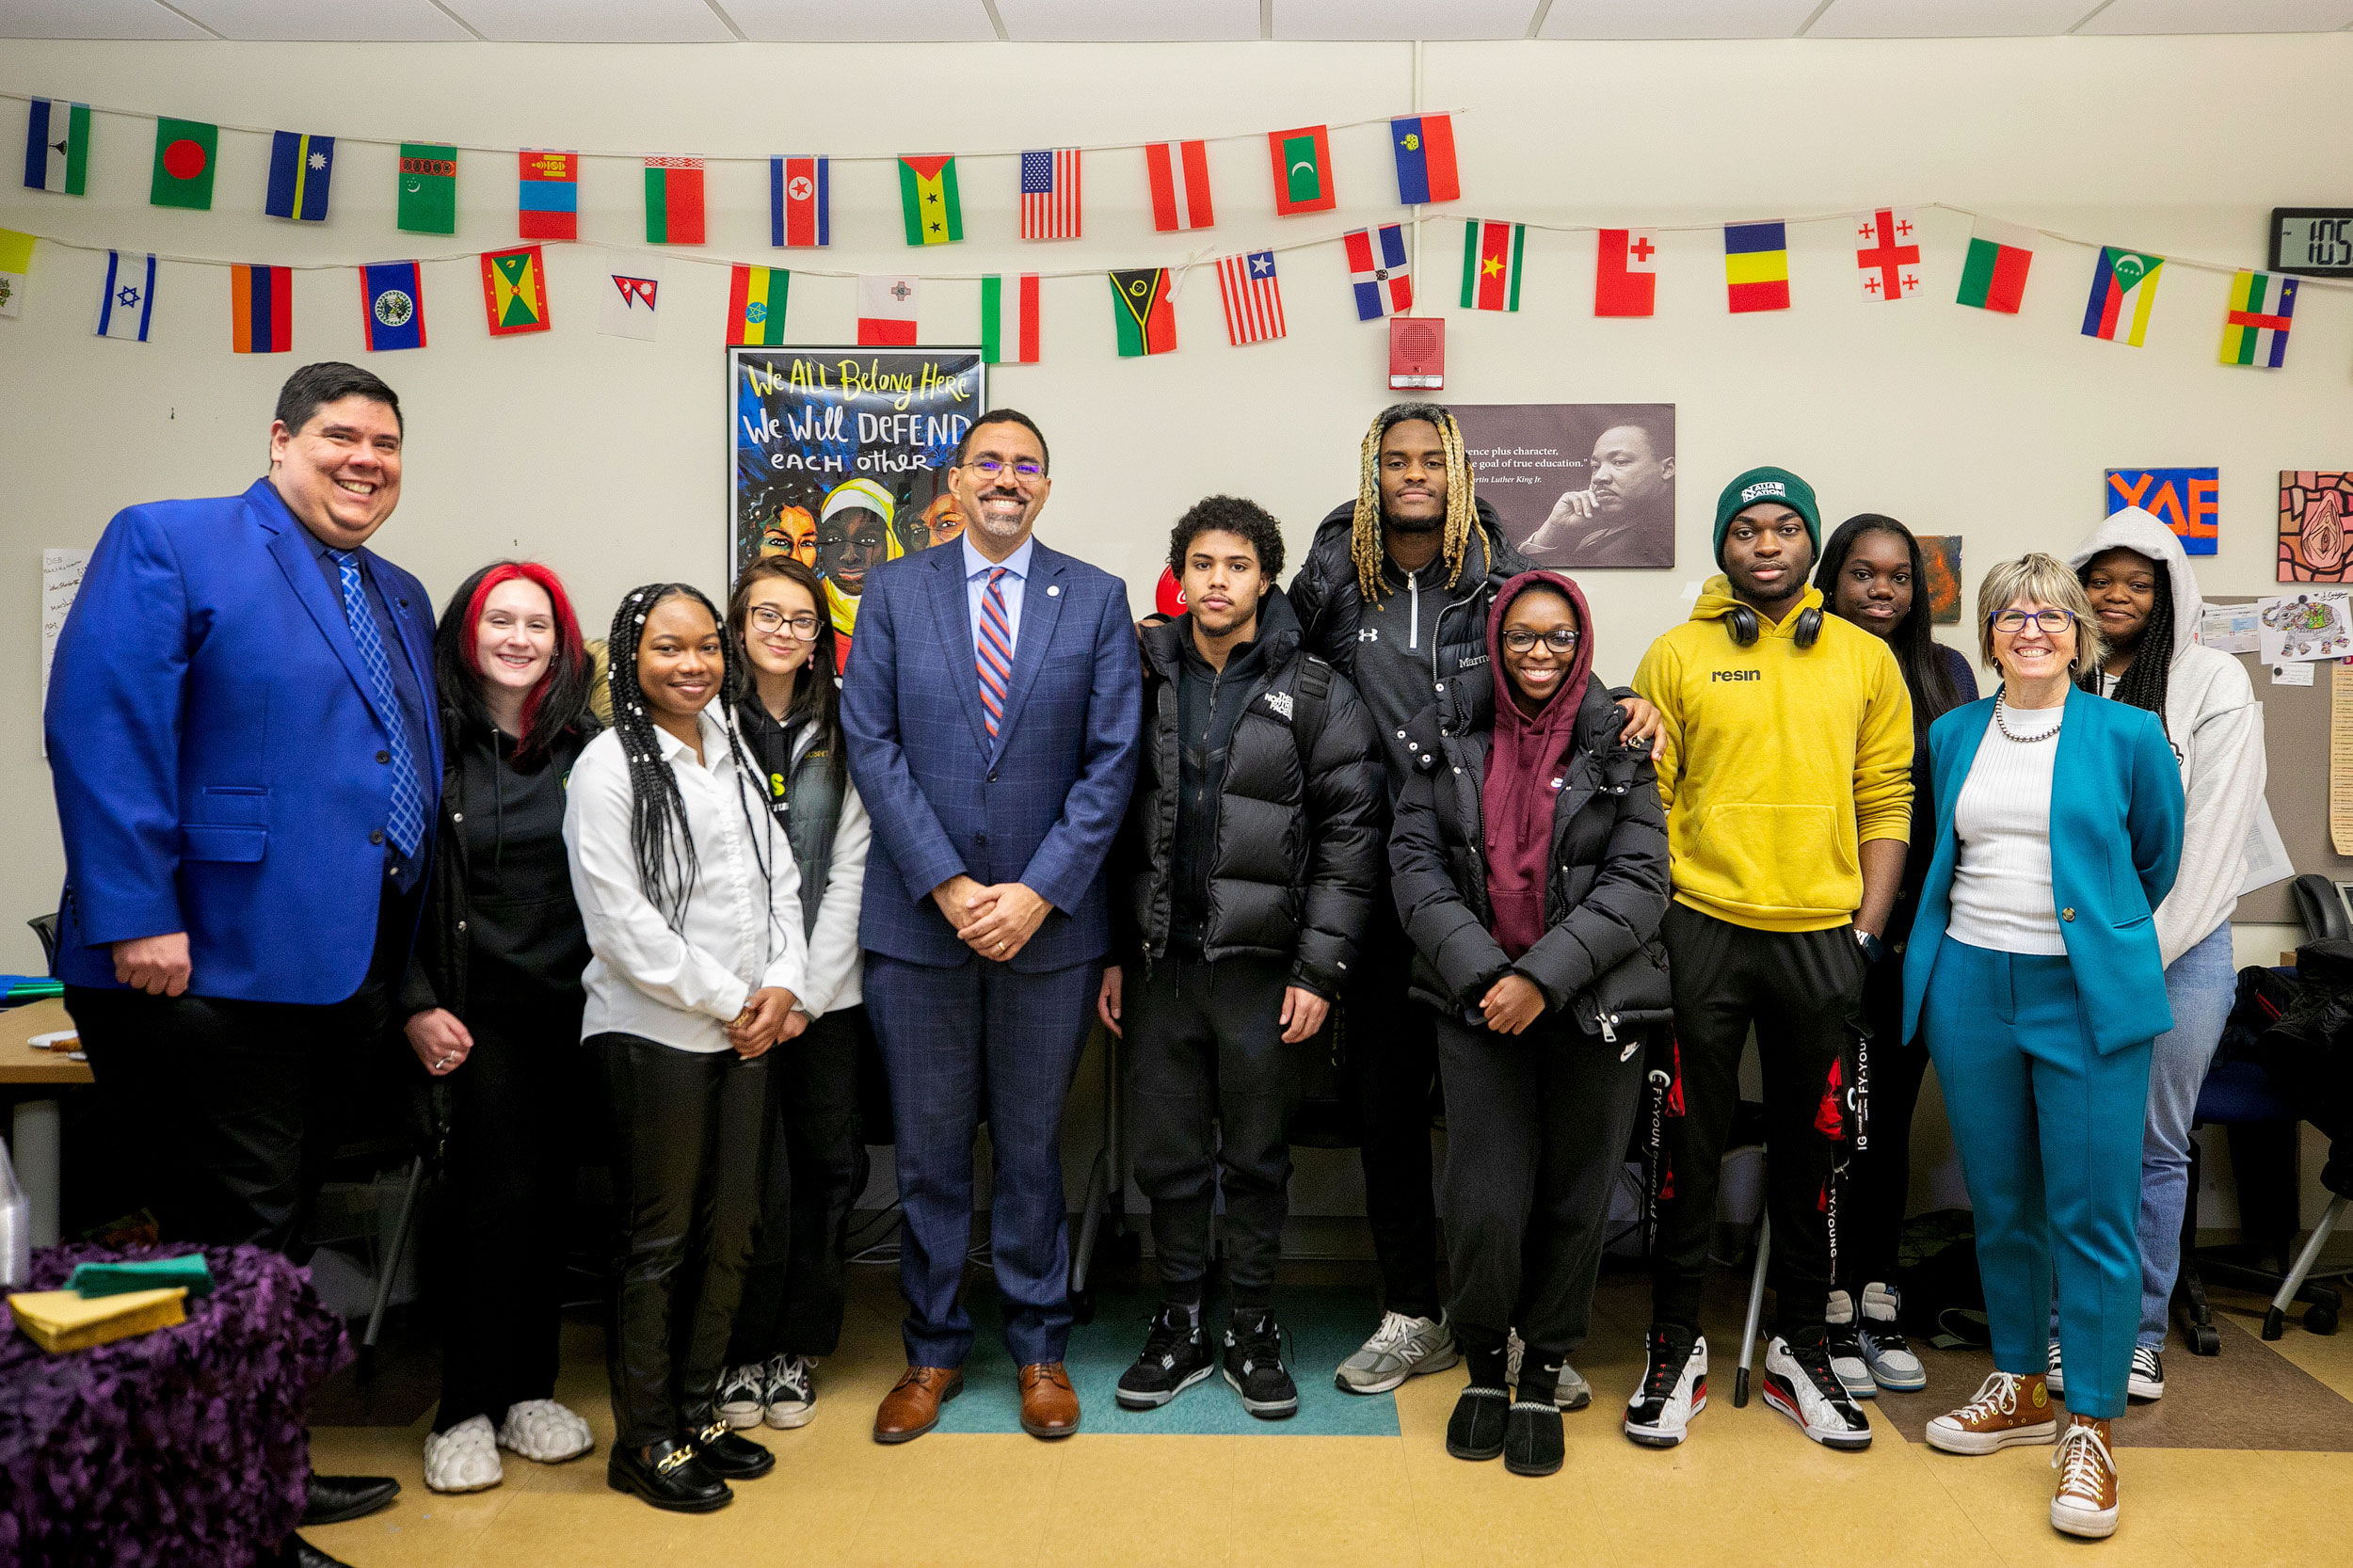 Chancellor John B. King, Jr. and Mary Bonderoff with Students during SUNY Delhi Tour